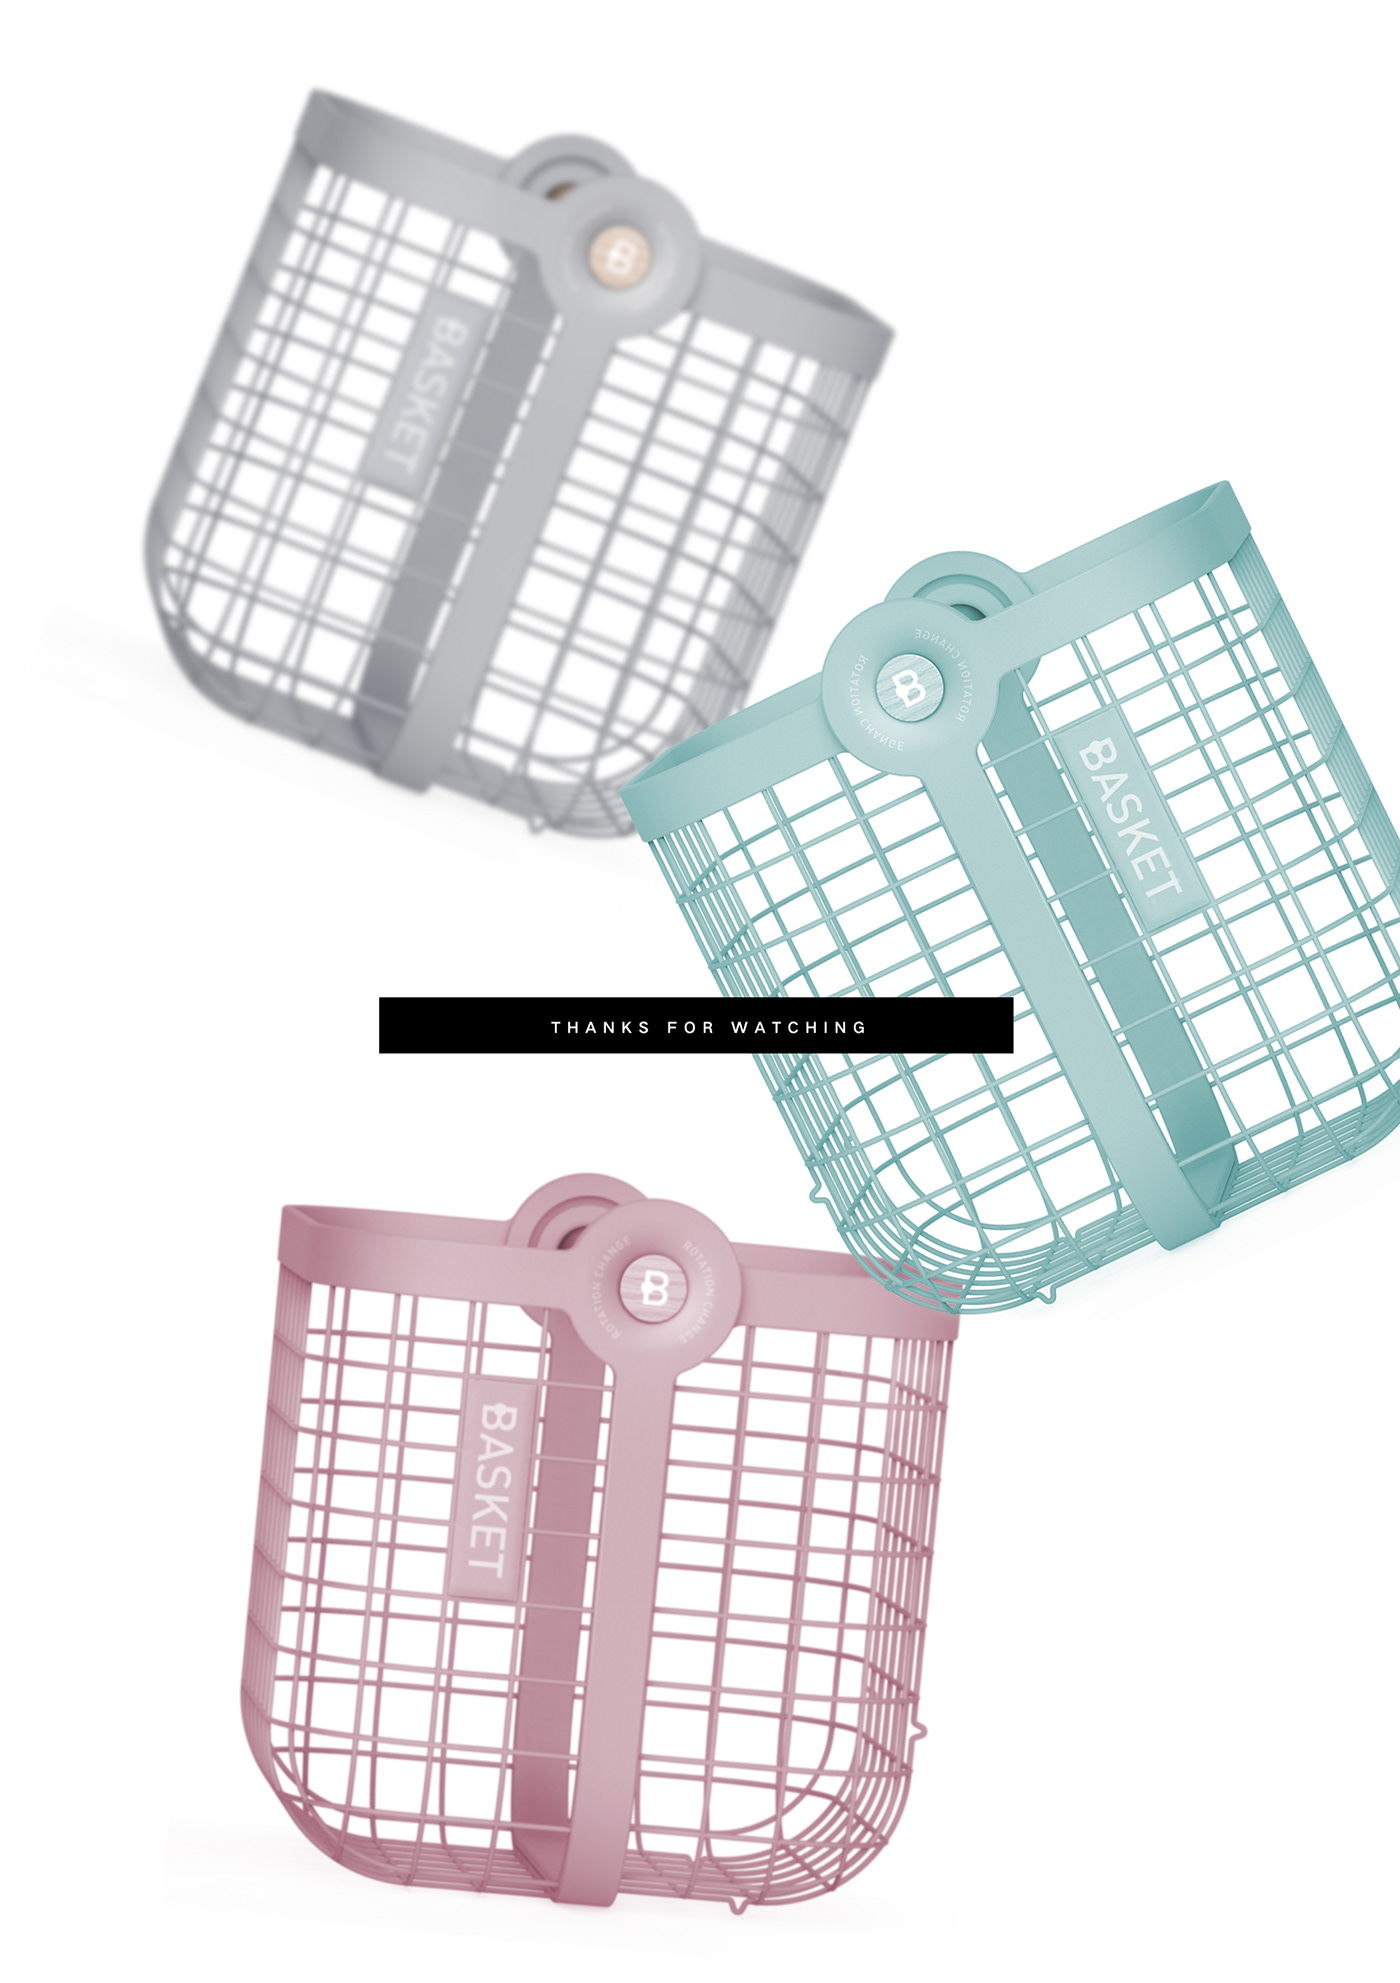 basket Receive and receive HOME FURNISHING life convenient practical Pleasantly surprised product design 